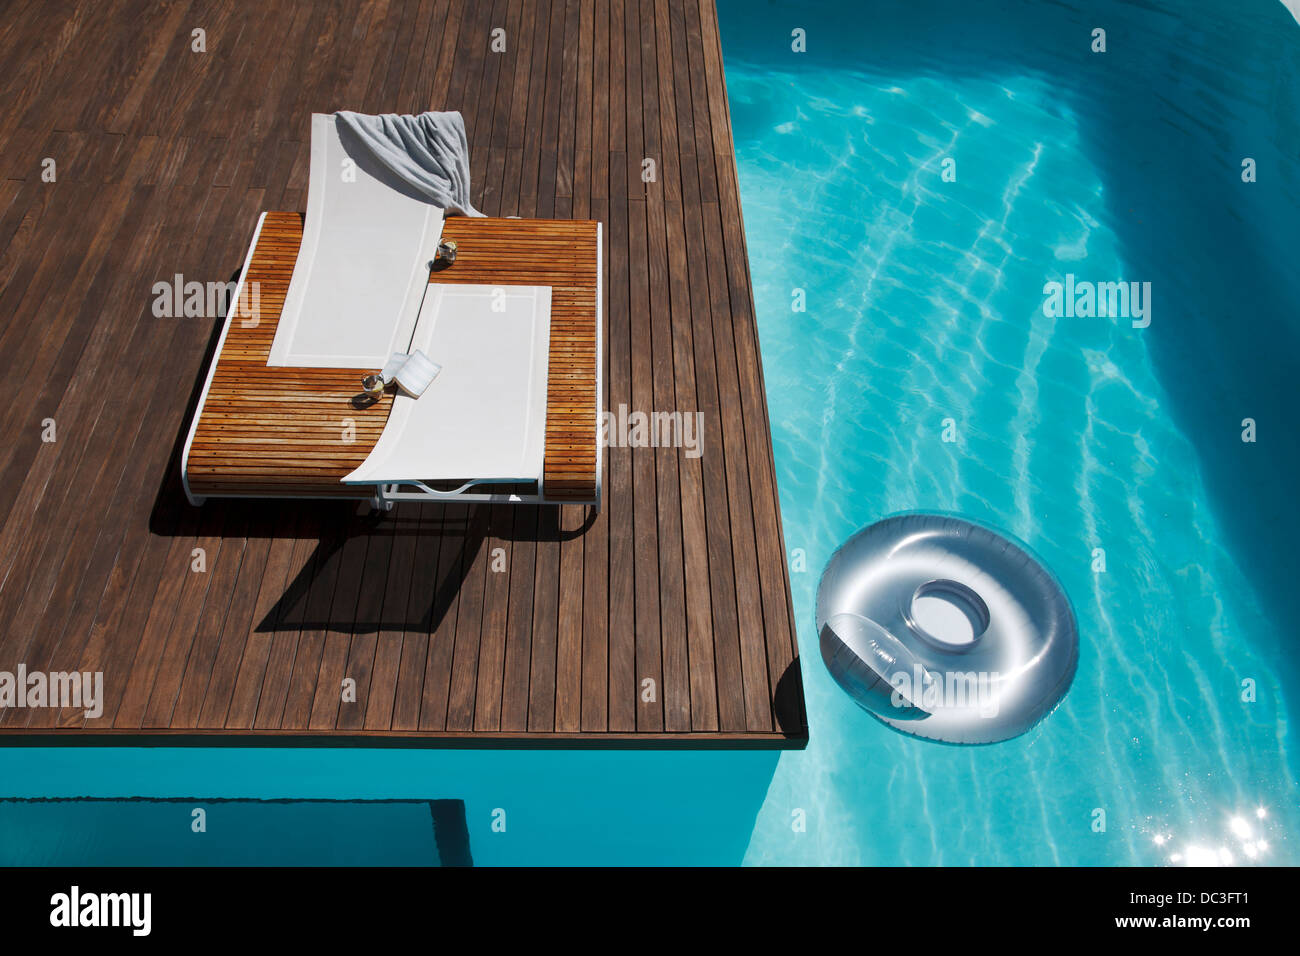 Lounge chairs on deck at luxury poolside Stock Photo